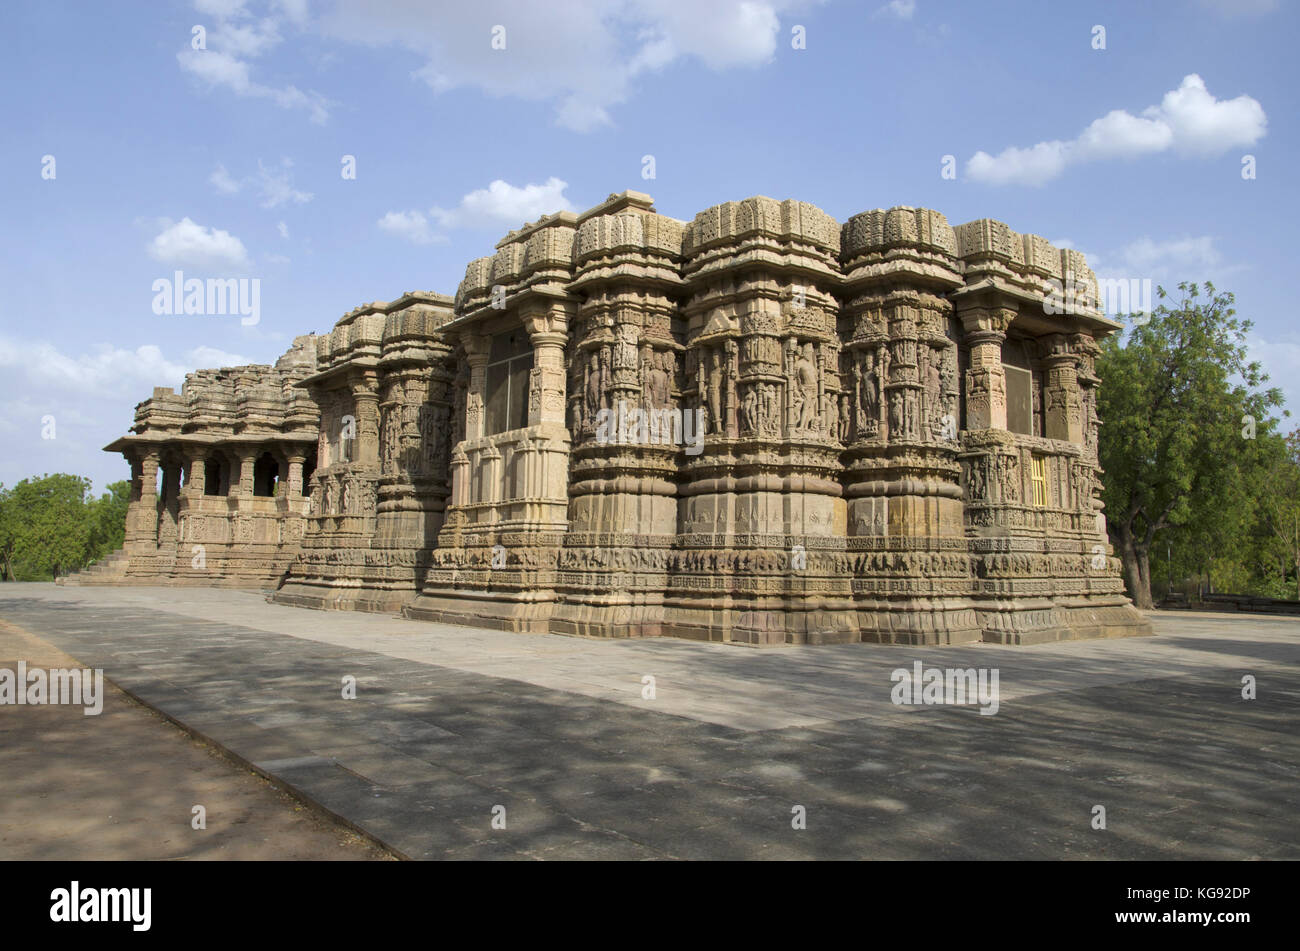 Outer view of the Sun Temple on the bank of the river Pushpavati. Built in 1026 - 27 AD during the reign of Bhima I of the Chaulukya dynasty, Modhera  Stock Photo